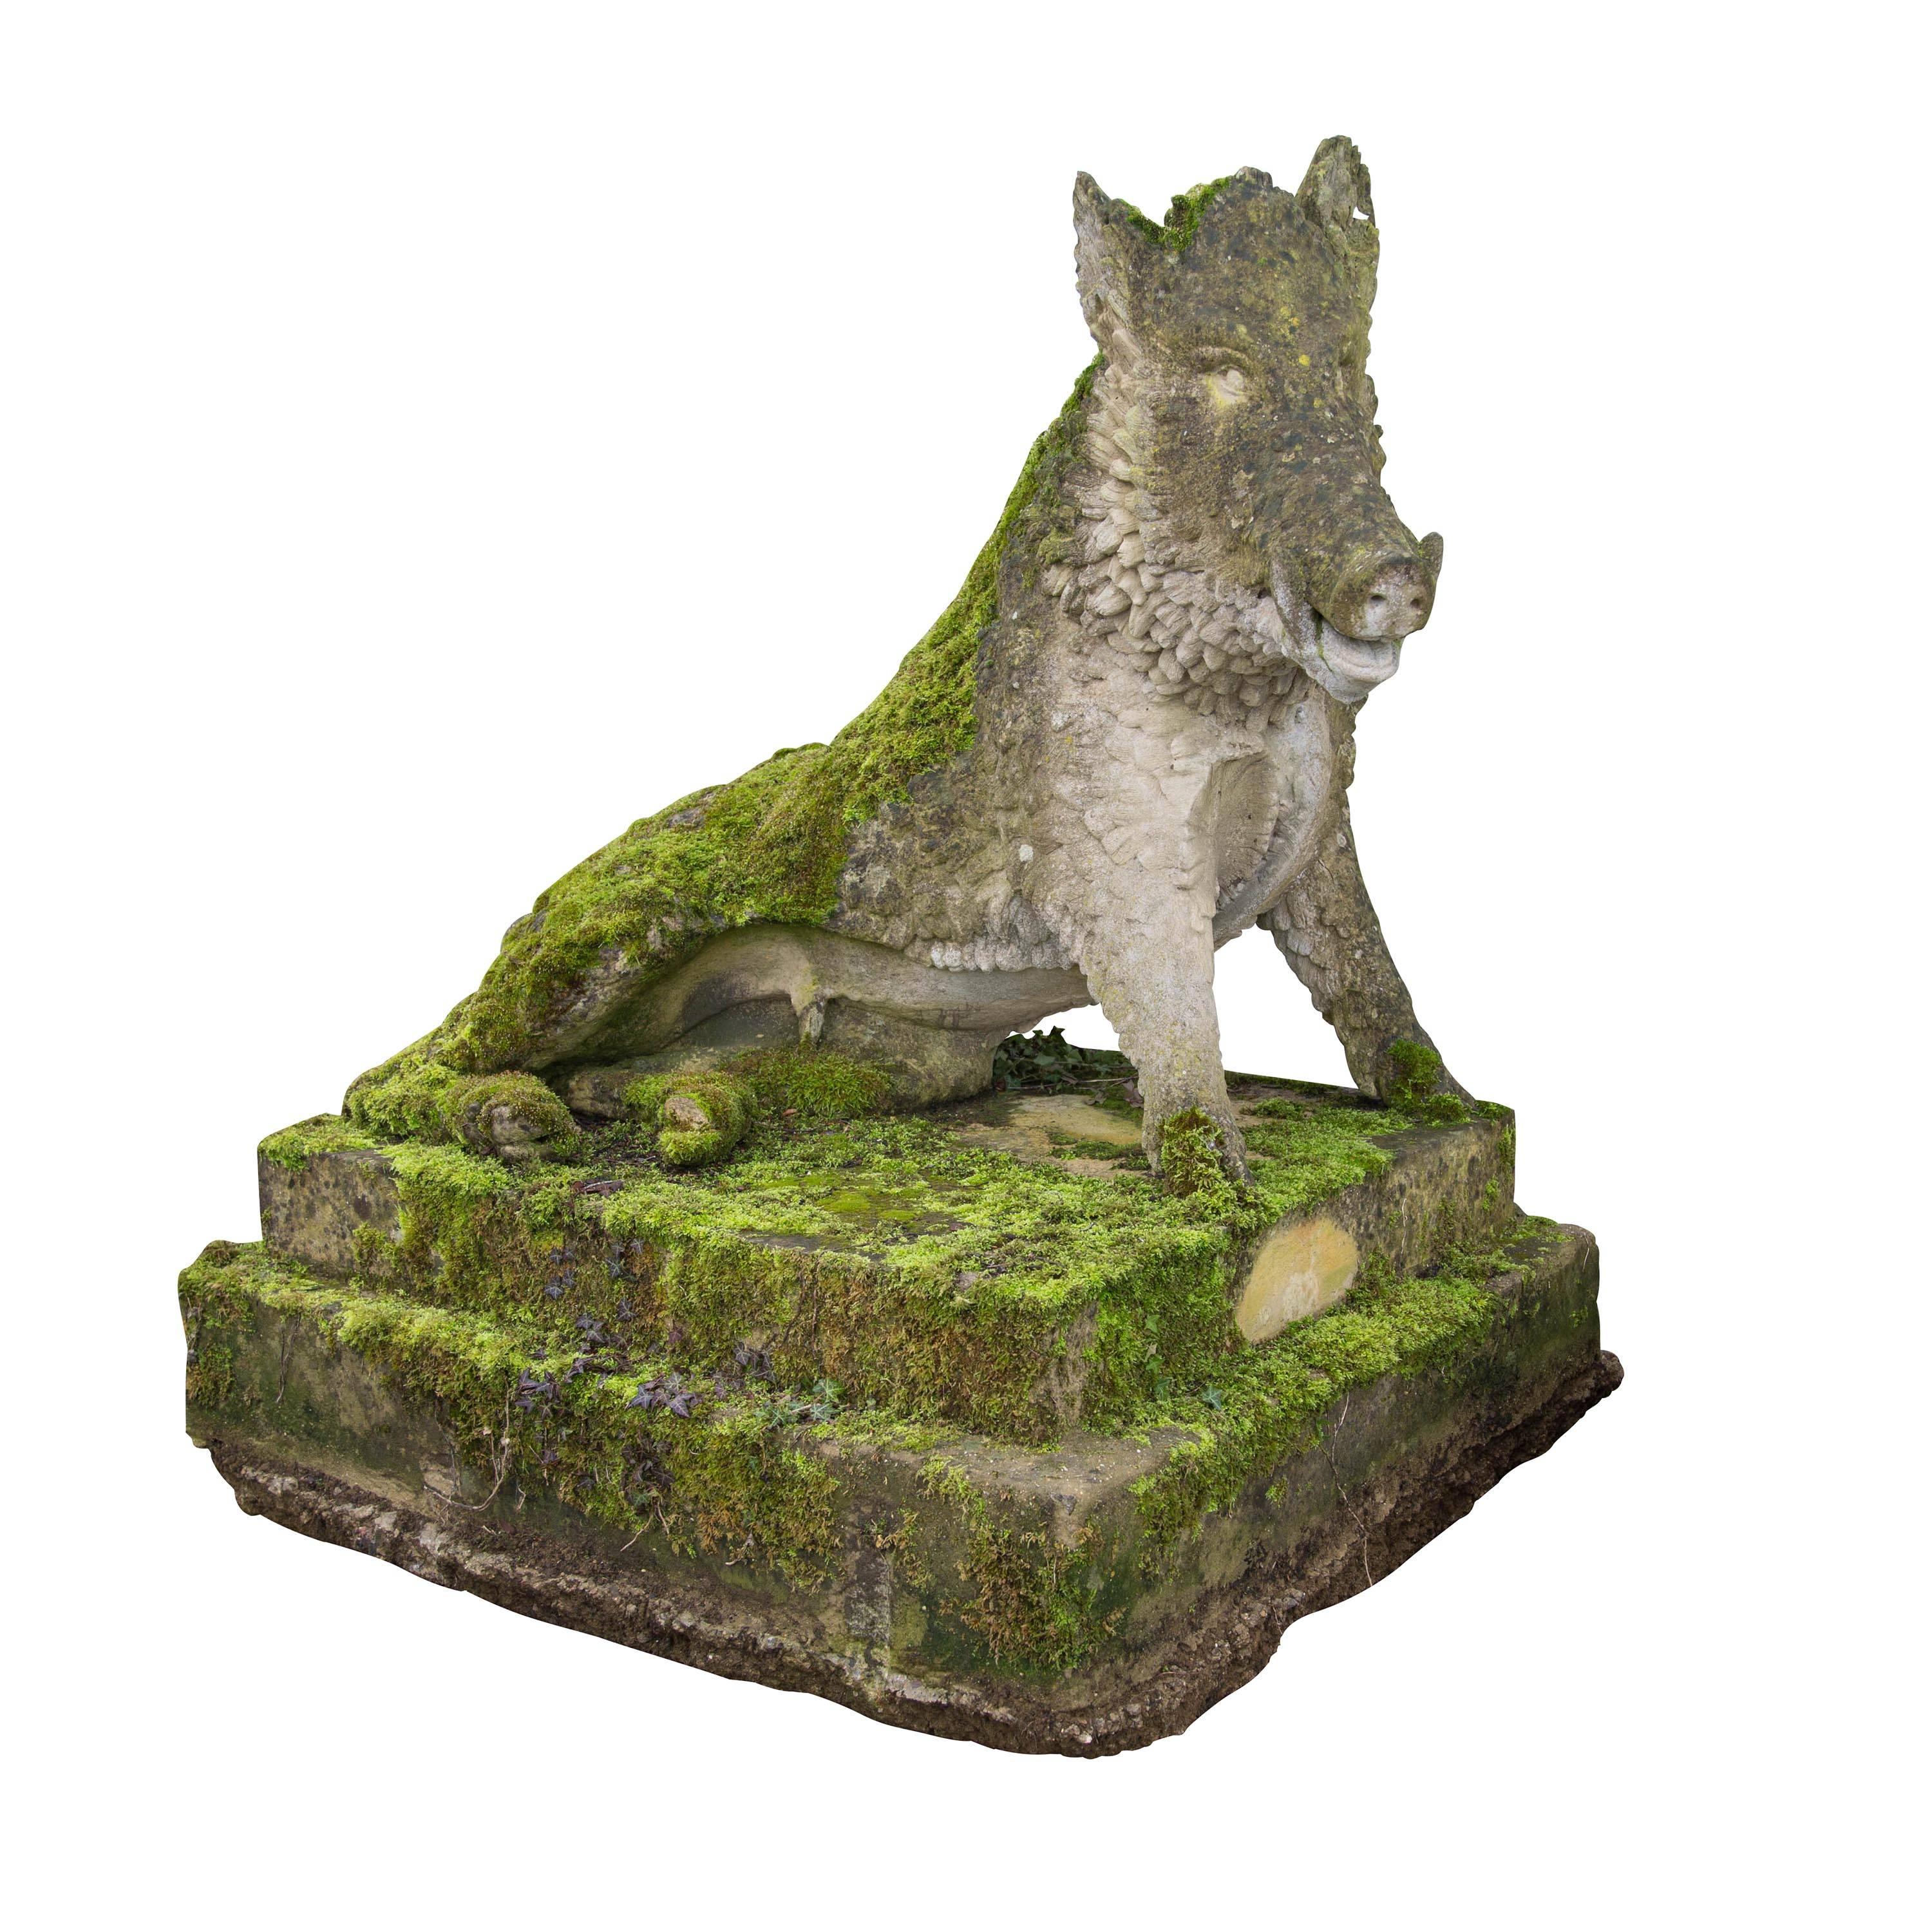 A large late 20th century composition stone boar. Also known as the Florentine boar, this famous animal sculpture can be seen as monumental public statues throughout Italy, and Europe, even as local to us, as Derby. The original Greek sculpture has